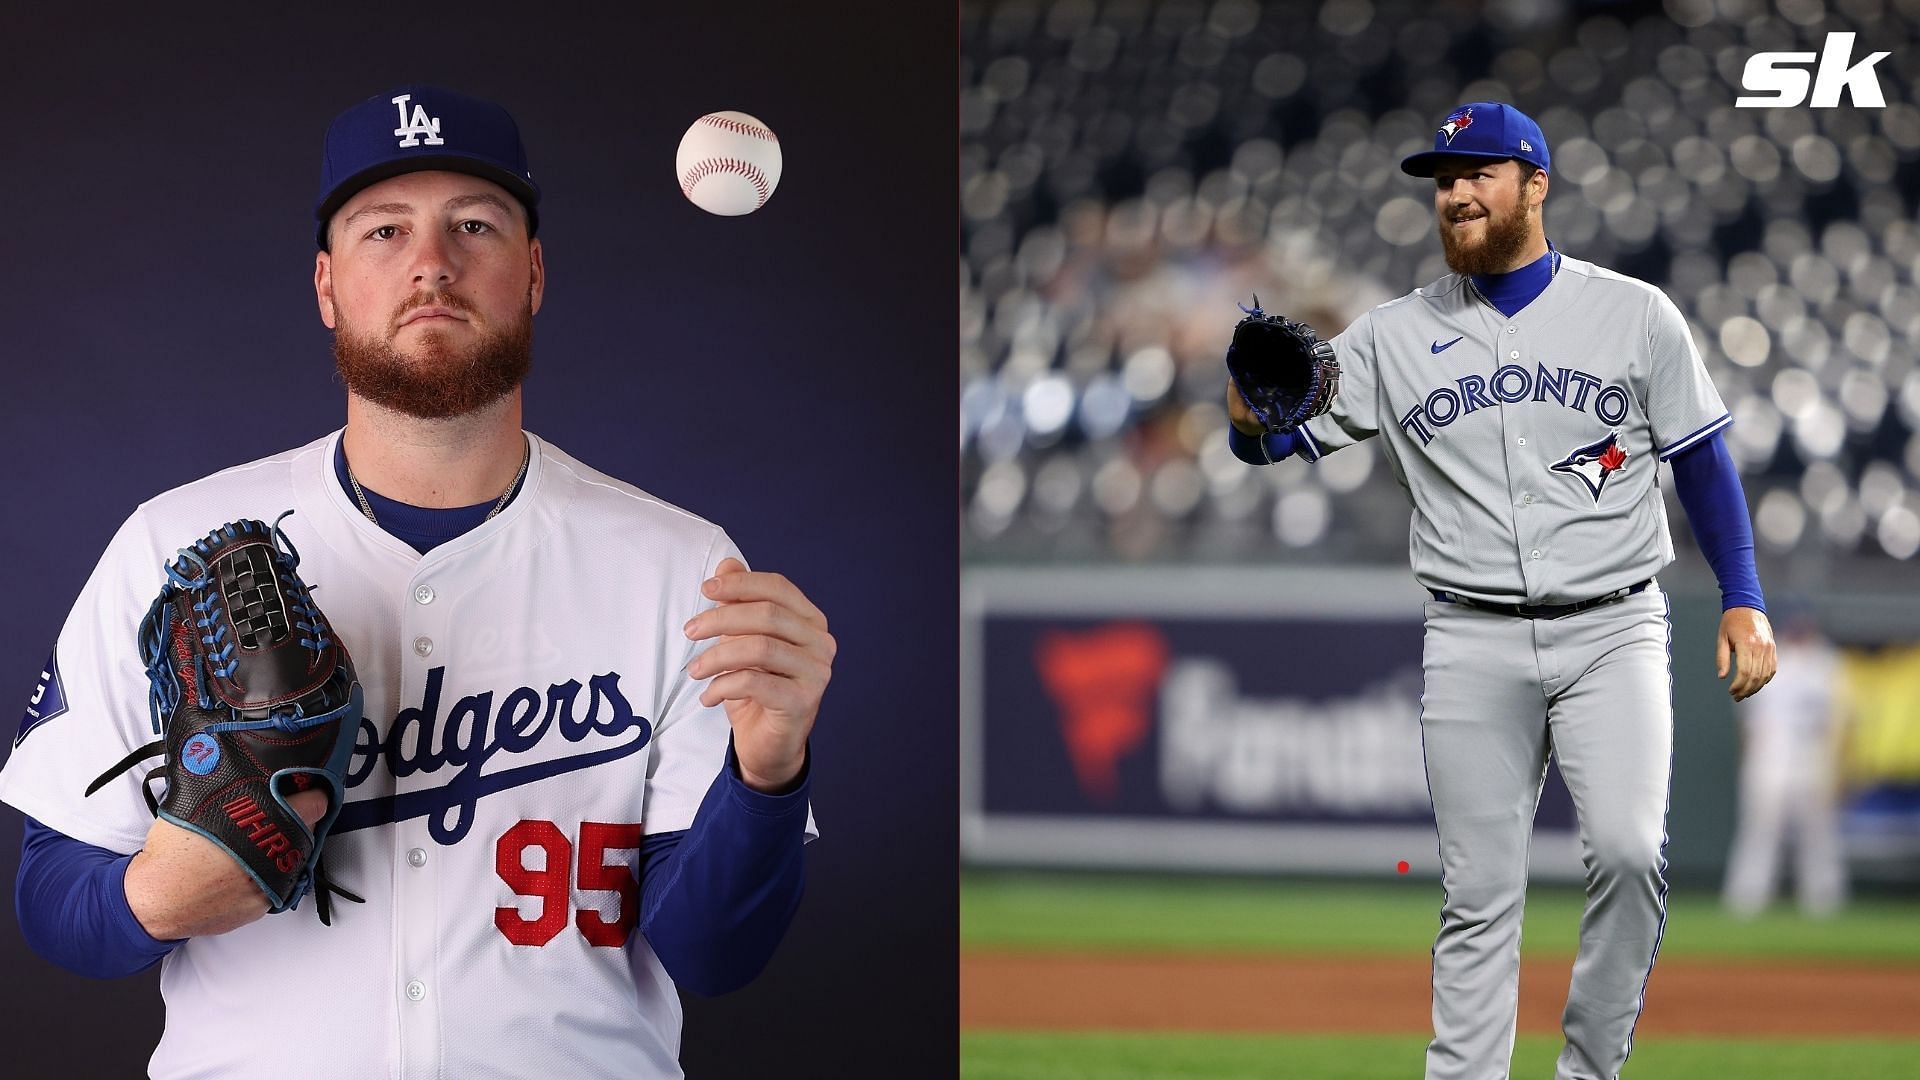 Matt Gage is back with the Dodgers organization